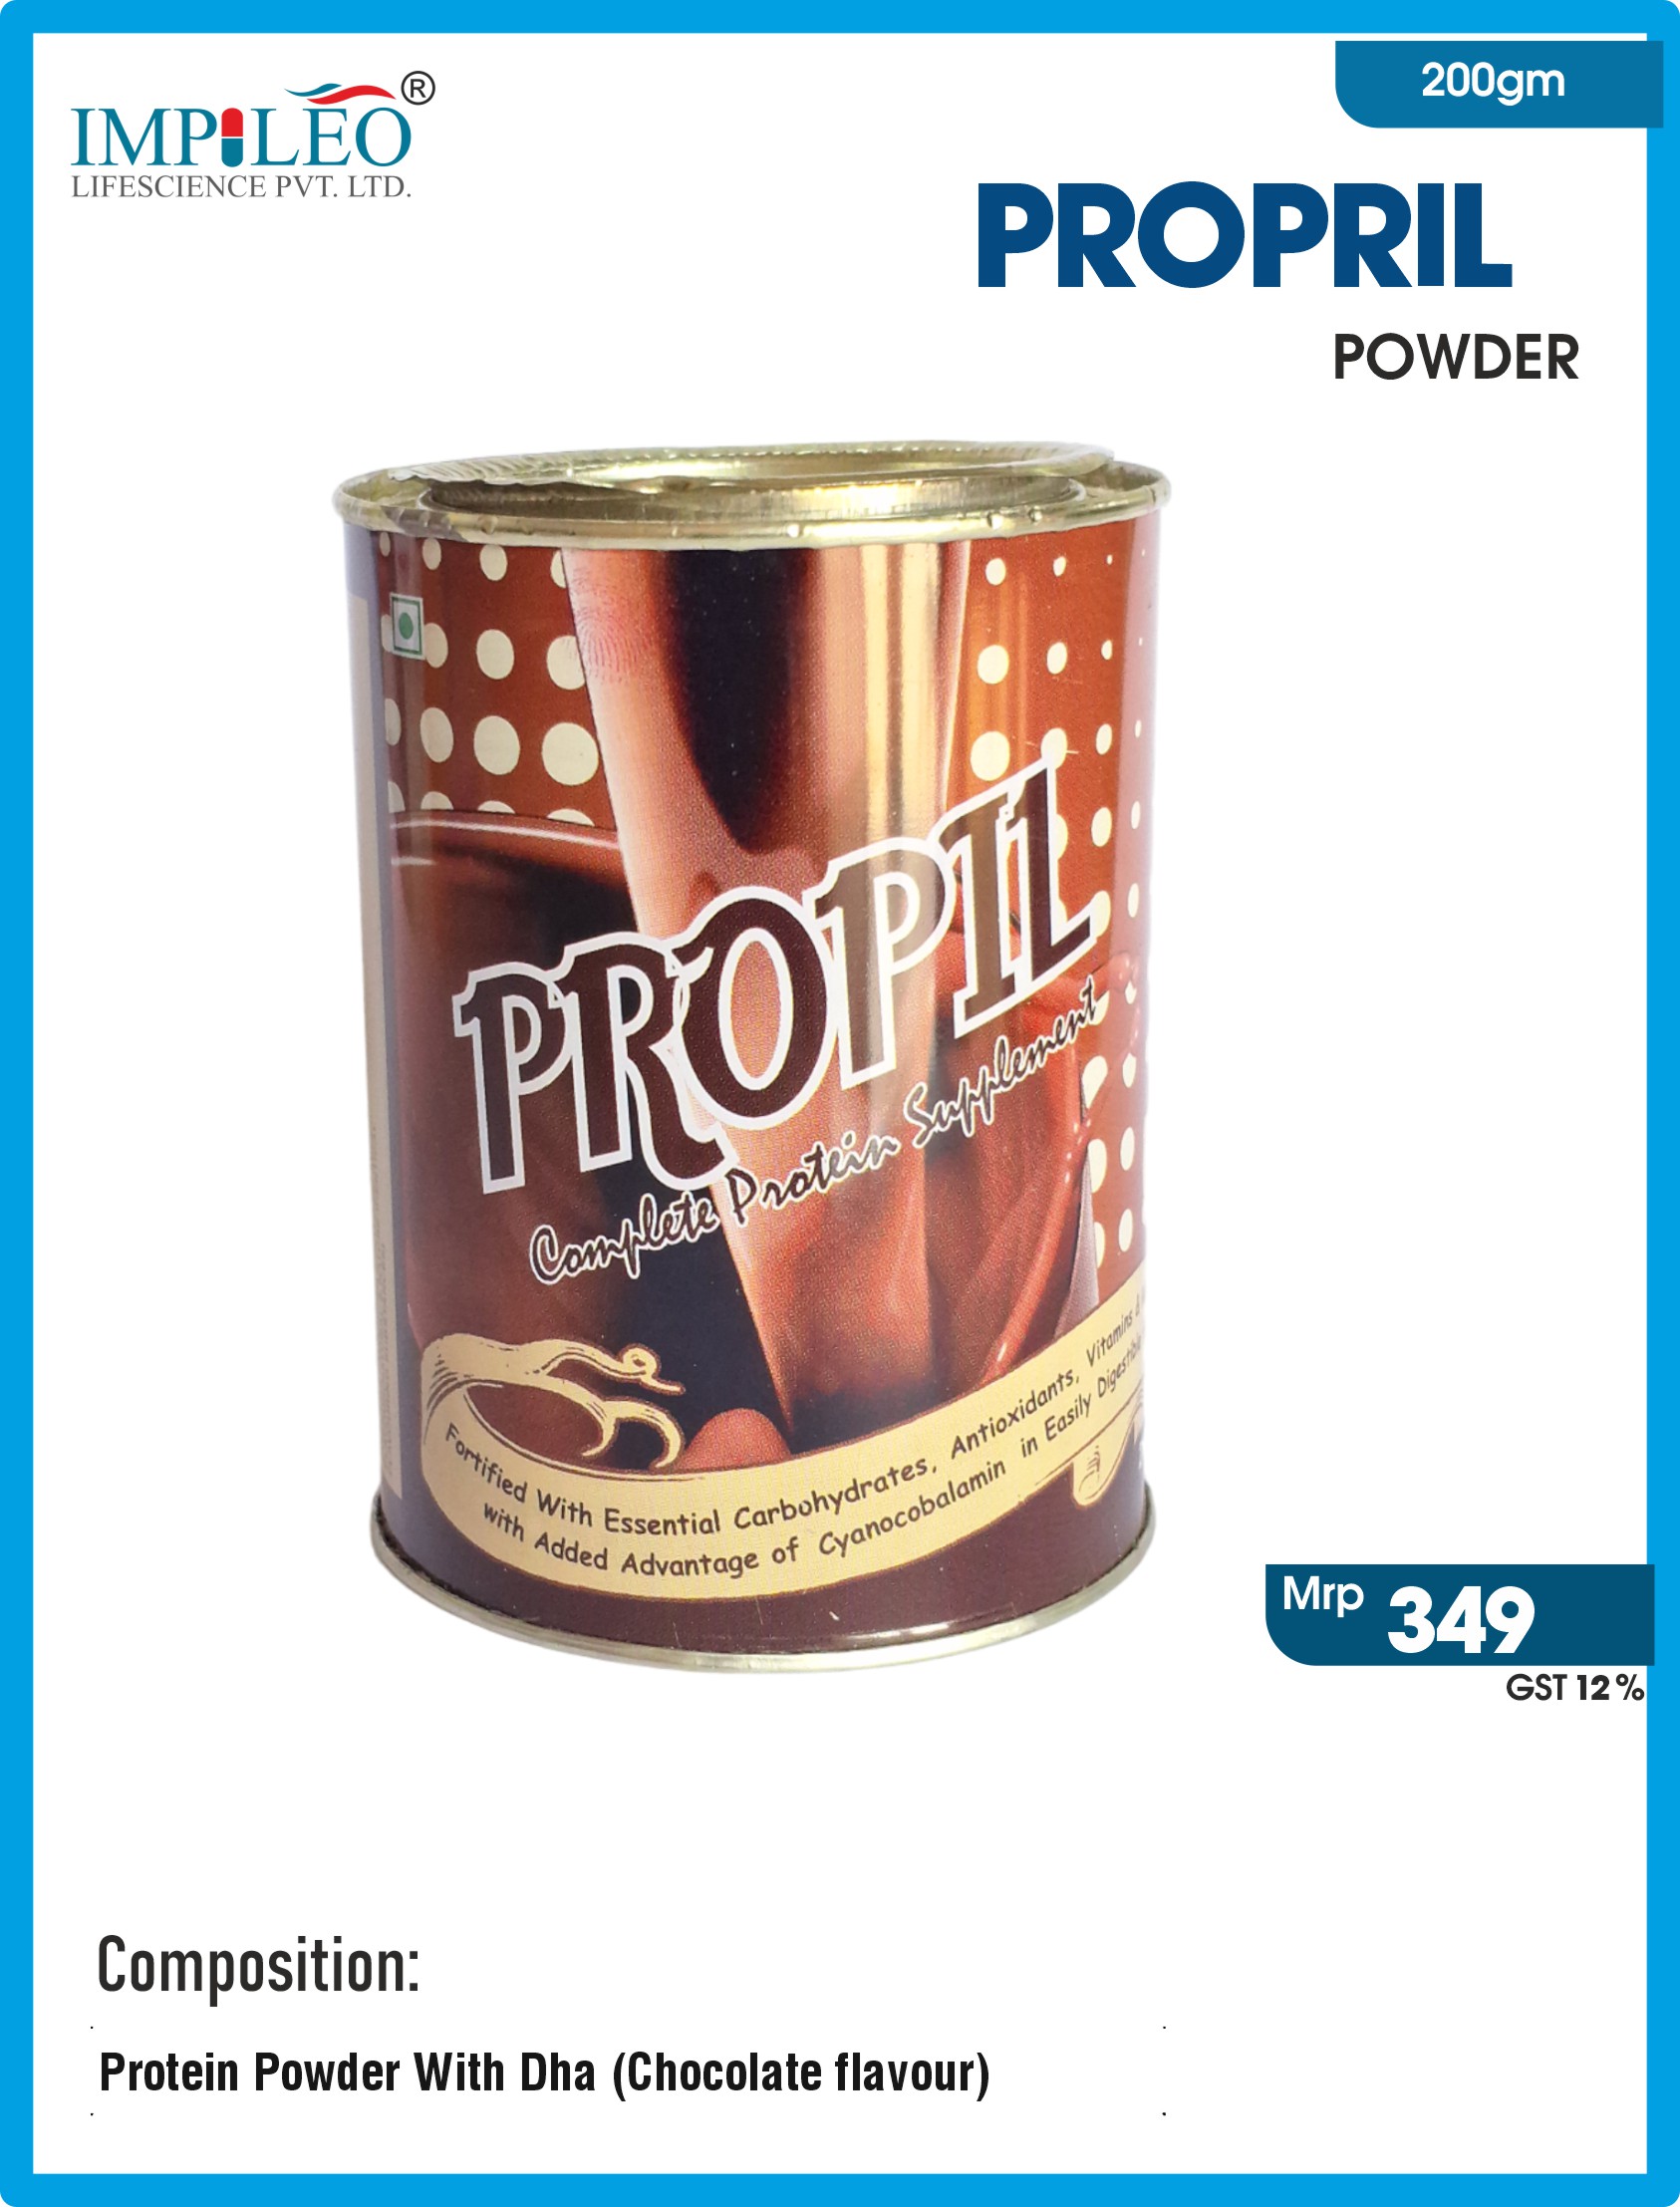 Premium Propil Powder (Chocolate Flavour) from Leading Third Party Manufacturer in India